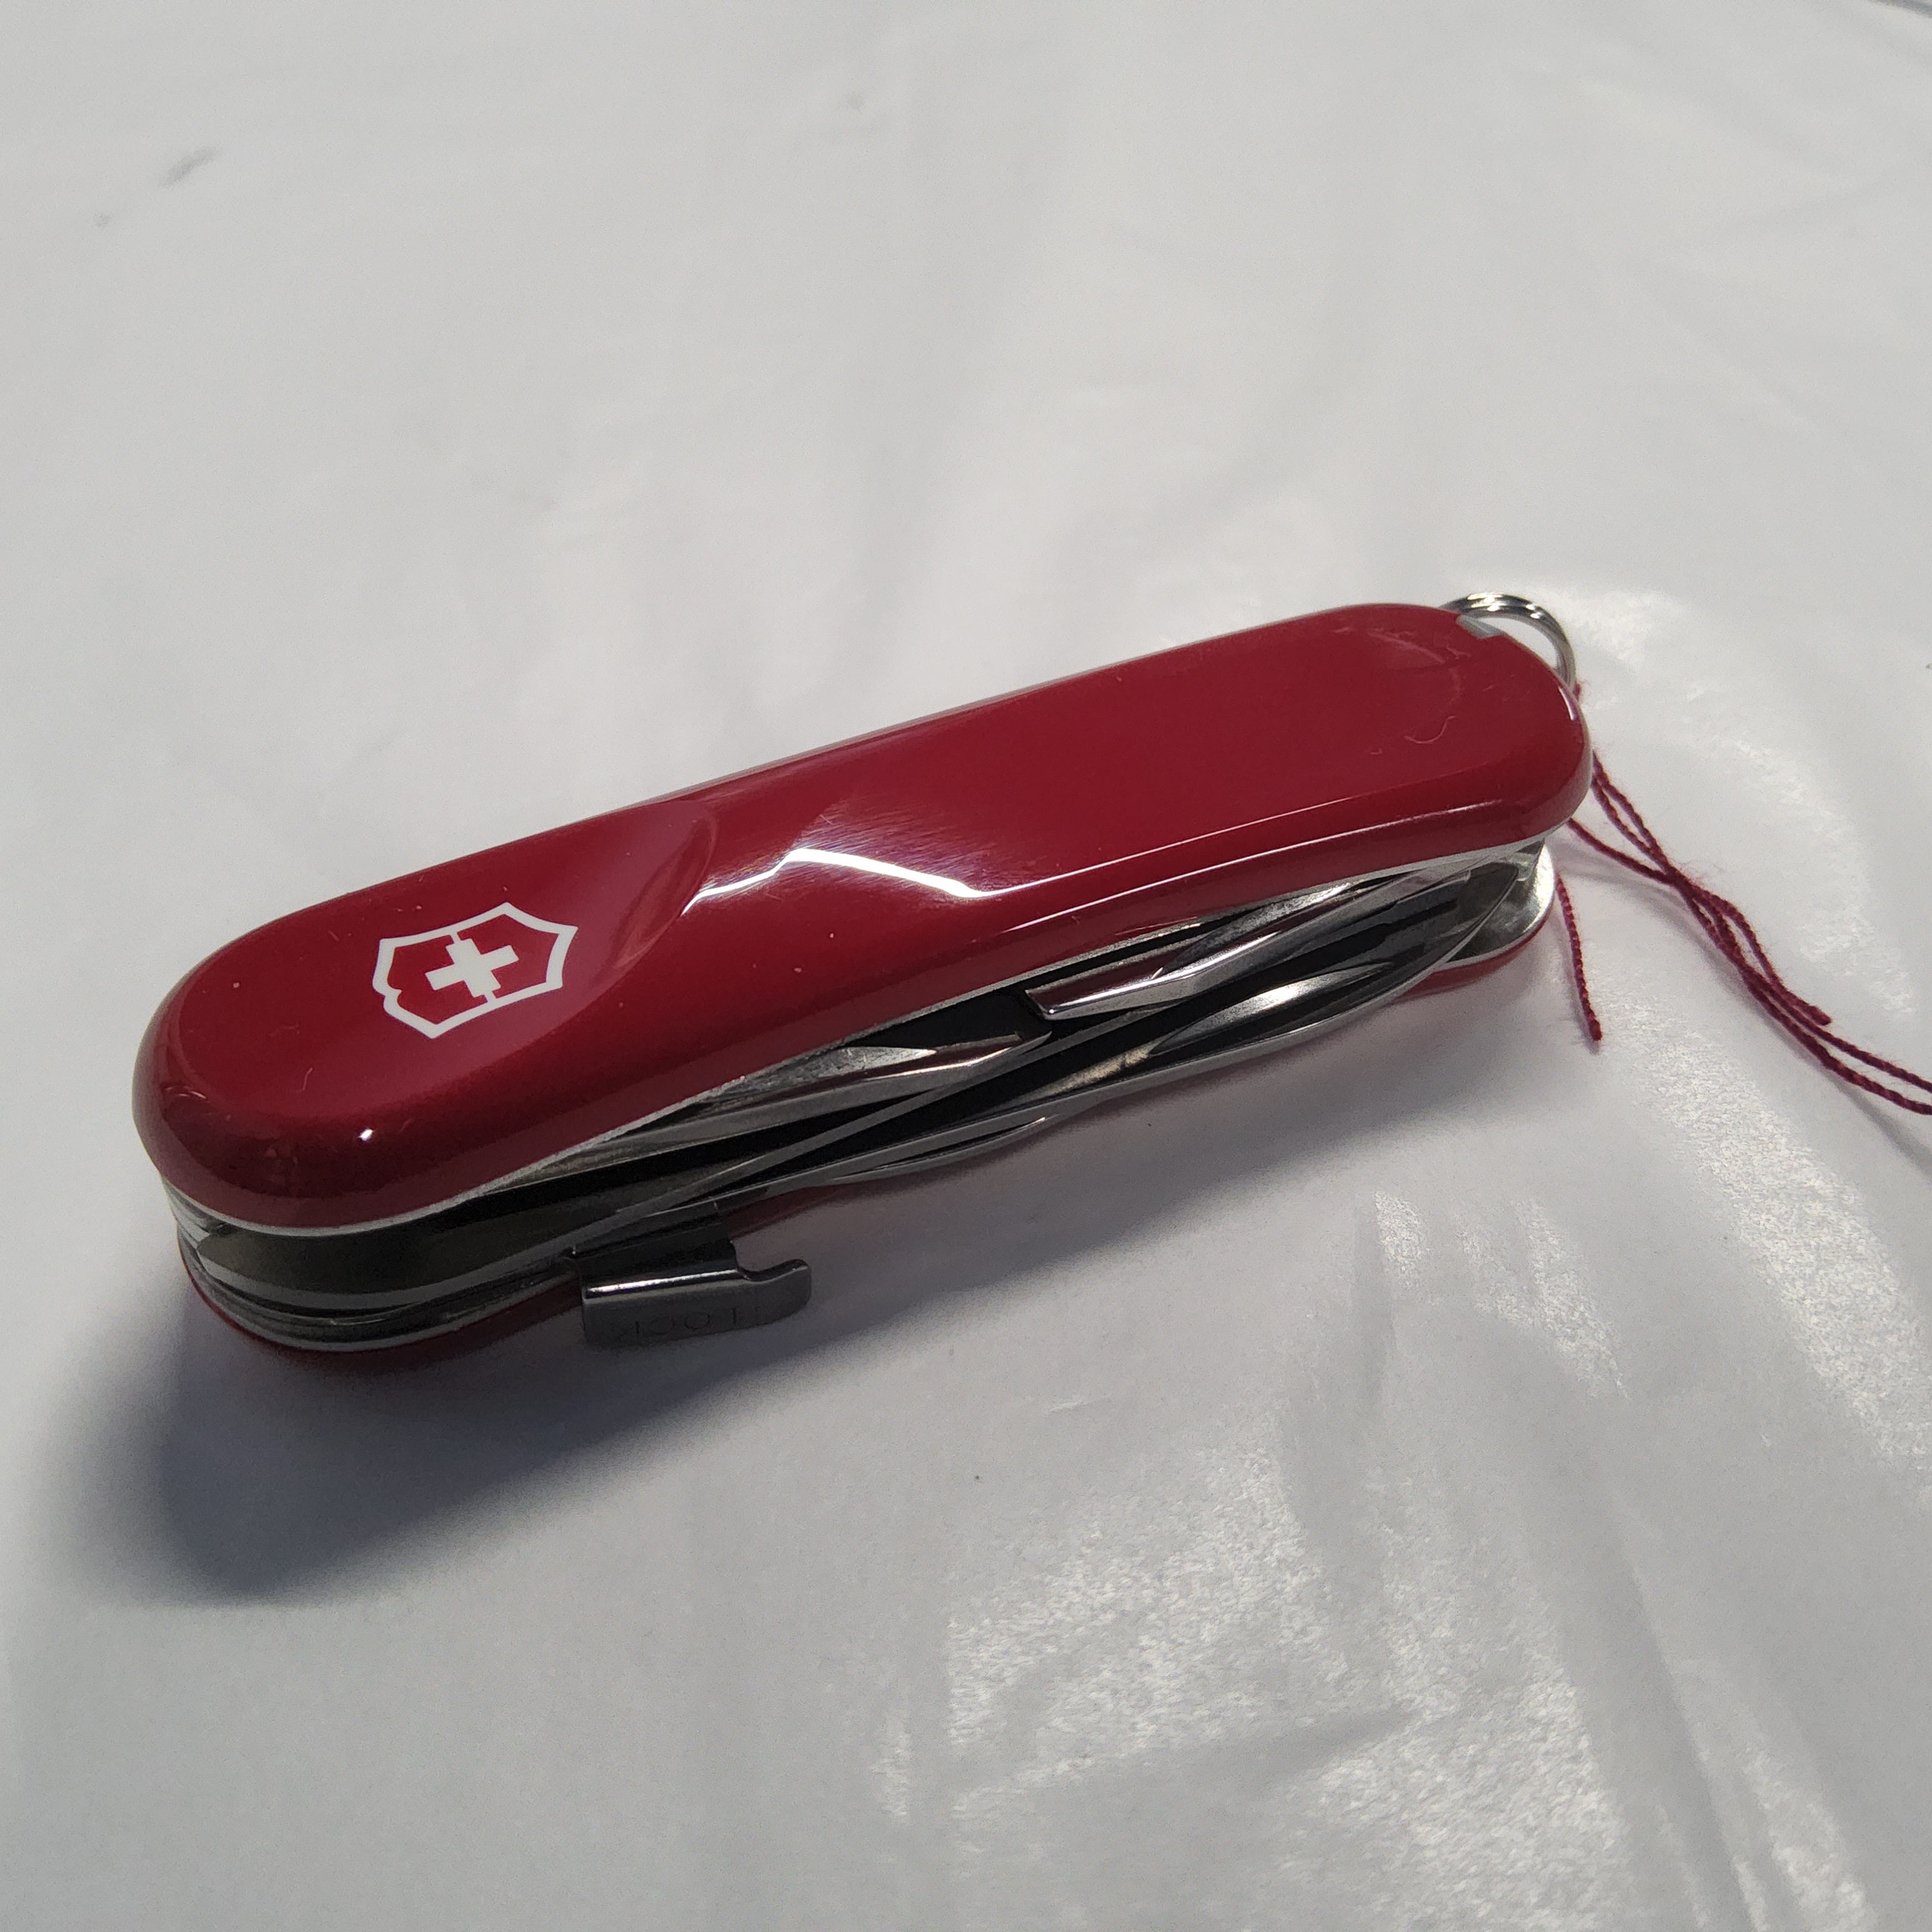 Swiss Army Knife - Evolution S13 - Red - Lock-Blade - 14 Functions 2.6813